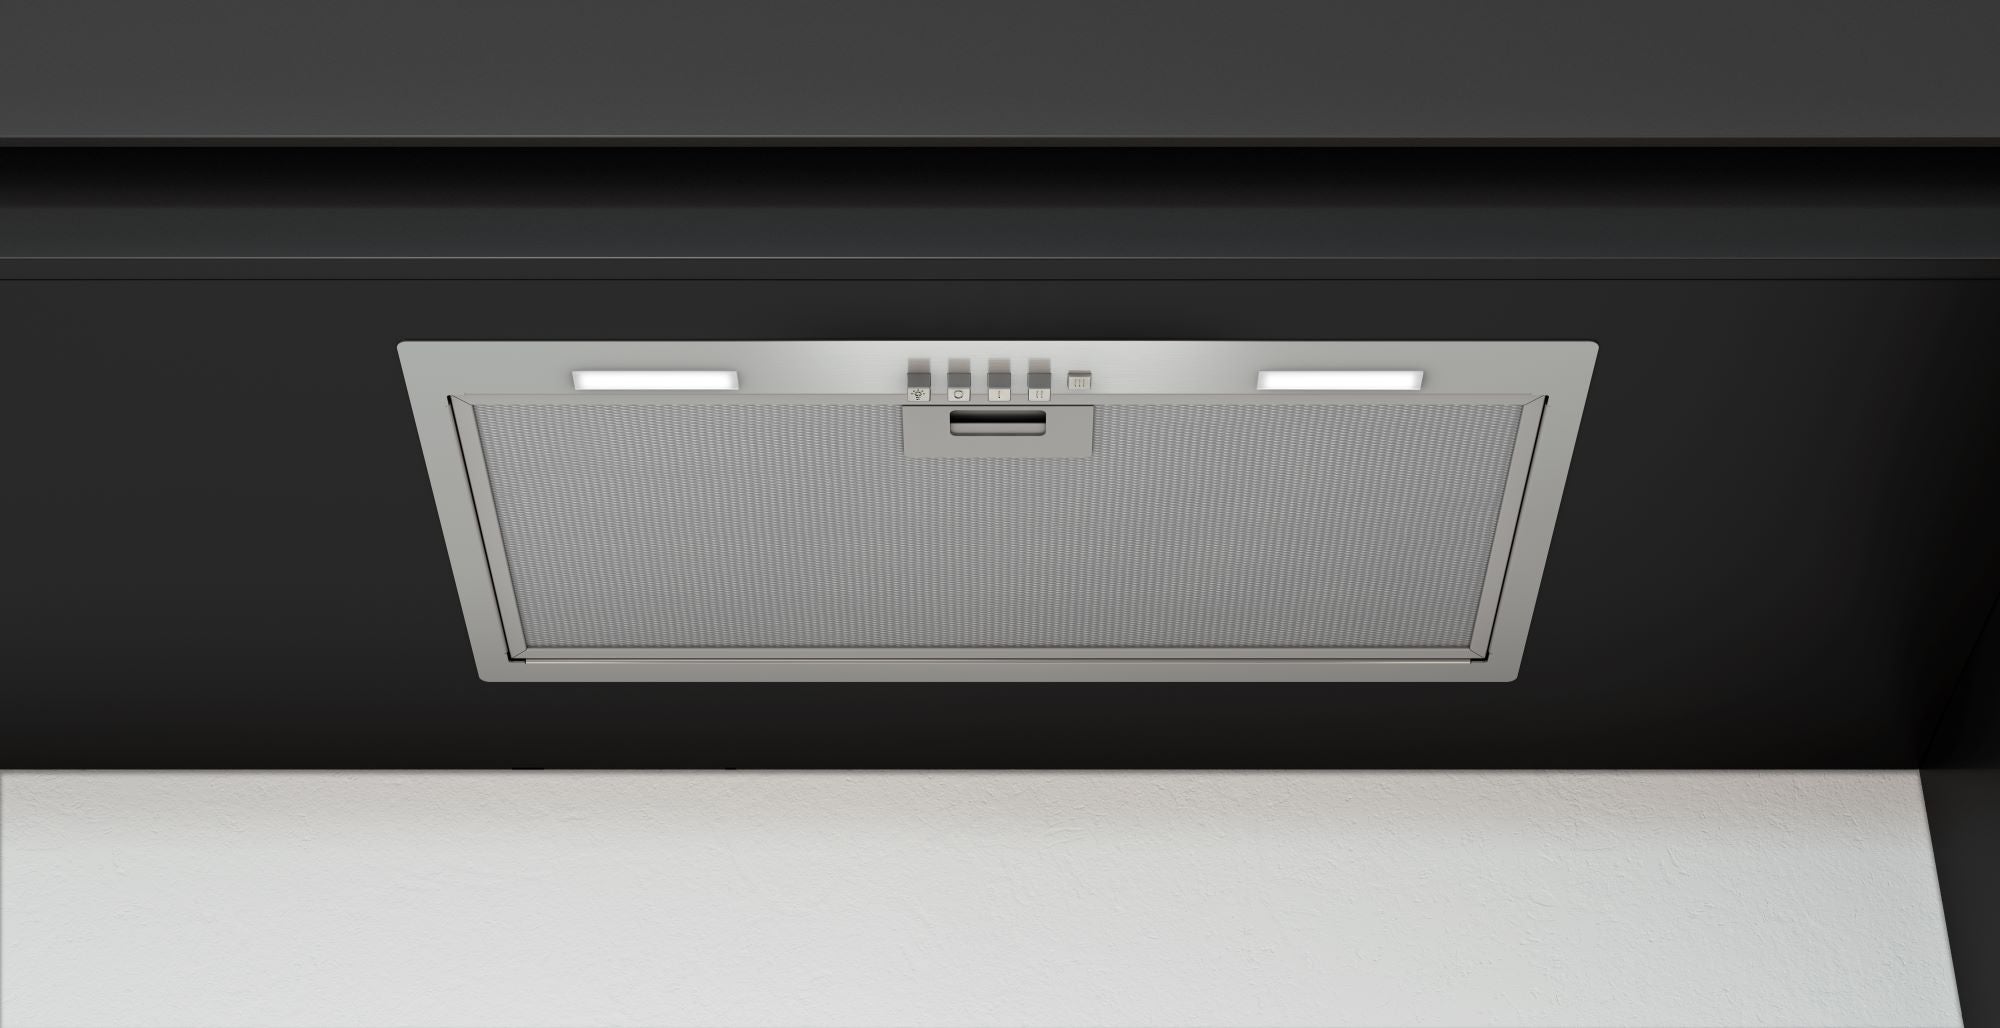 Airforce Modulo POP 52cm Built-In Cooker Hood 3 Speed Push Buttons- Stainless Steel Finish